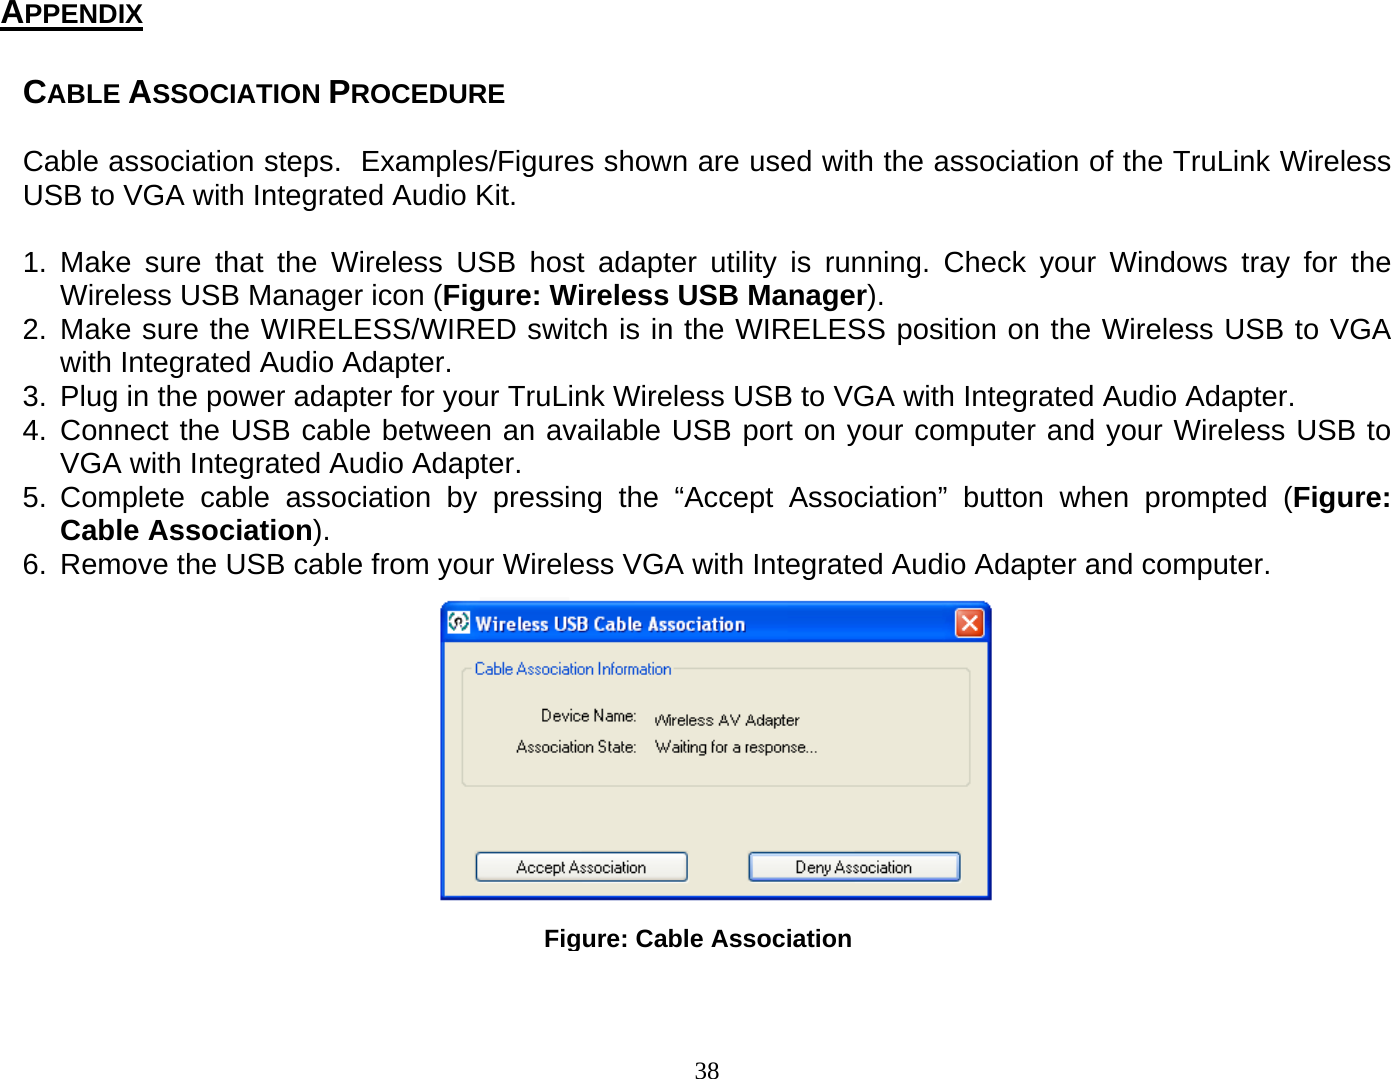 38 Figure: Cable AssociationCABLE ASSOCIATION PROCEDURE   Cable association steps.  Examples/Figures shown are used with the association of the TruLink Wireless USB to VGA with Integrated Audio Kit.    1. Make sure that the Wireless USB host adapter utility is running. Check your Windows tray for the Wireless USB Manager icon (Figure: Wireless USB Manager). 2. Make sure the WIRELESS/WIRED switch is in the WIRELESS position on the Wireless USB to VGA with Integrated Audio Adapter.  3.  Plug in the power adapter for your TruLink Wireless USB to VGA with Integrated Audio Adapter. 4. Connect the USB cable between an available USB port on your computer and your Wireless USB to VGA with Integrated Audio Adapter.  5. Complete cable association by pressing the “Accept Association” button when prompted (Figure: Cable Association). 6.  Remove the USB cable from your Wireless VGA with Integrated Audio Adapter and computer.                  APPENDIX 